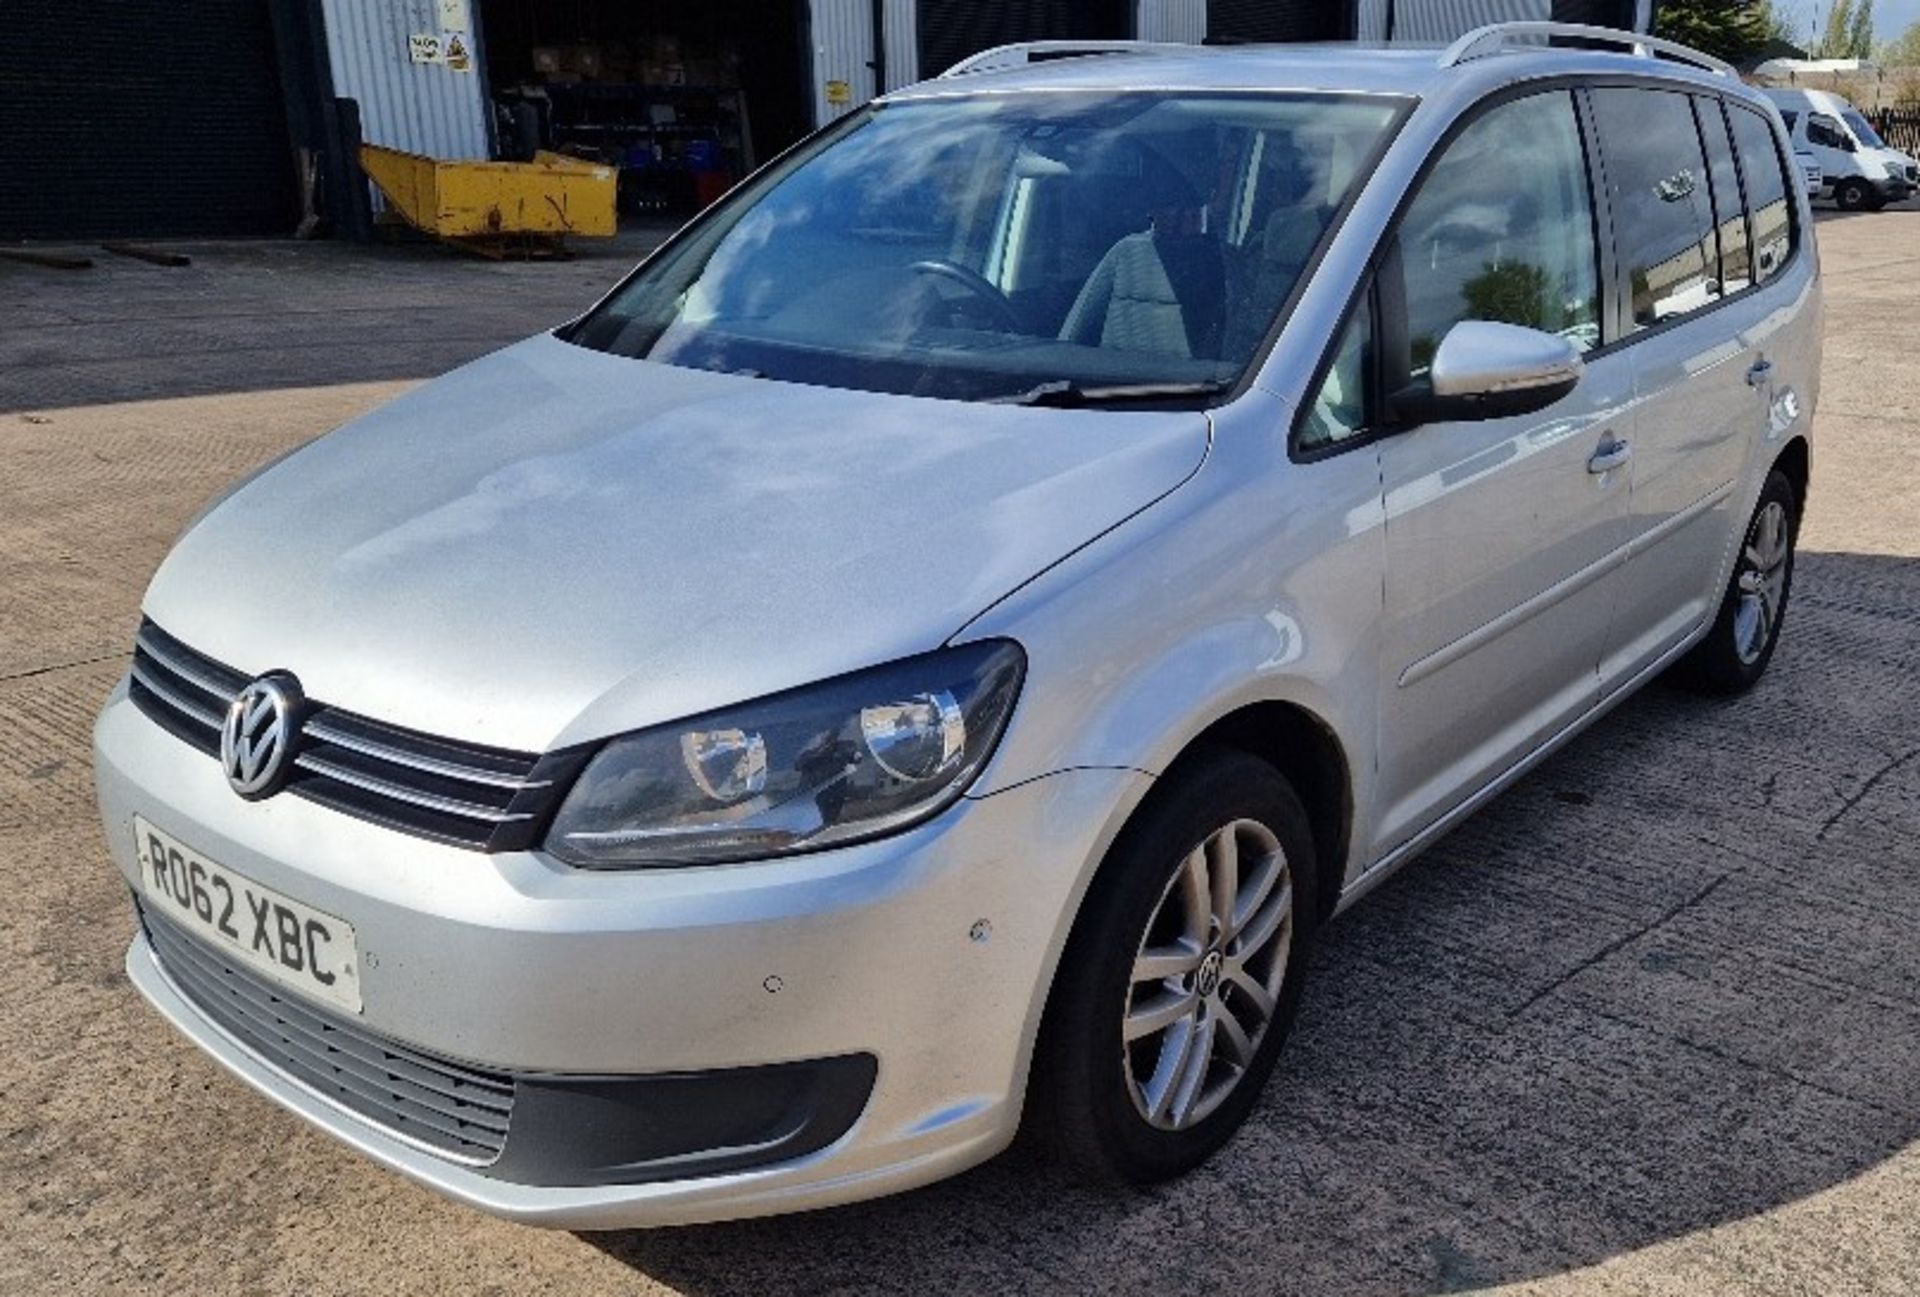 SILVER VOLKSWAGEN TOURAN SE TDI S-A DIESEL MPV 1598CC FIRST REGISTERED 17/10/2012 REG: RO62XBC - Image 2 of 9